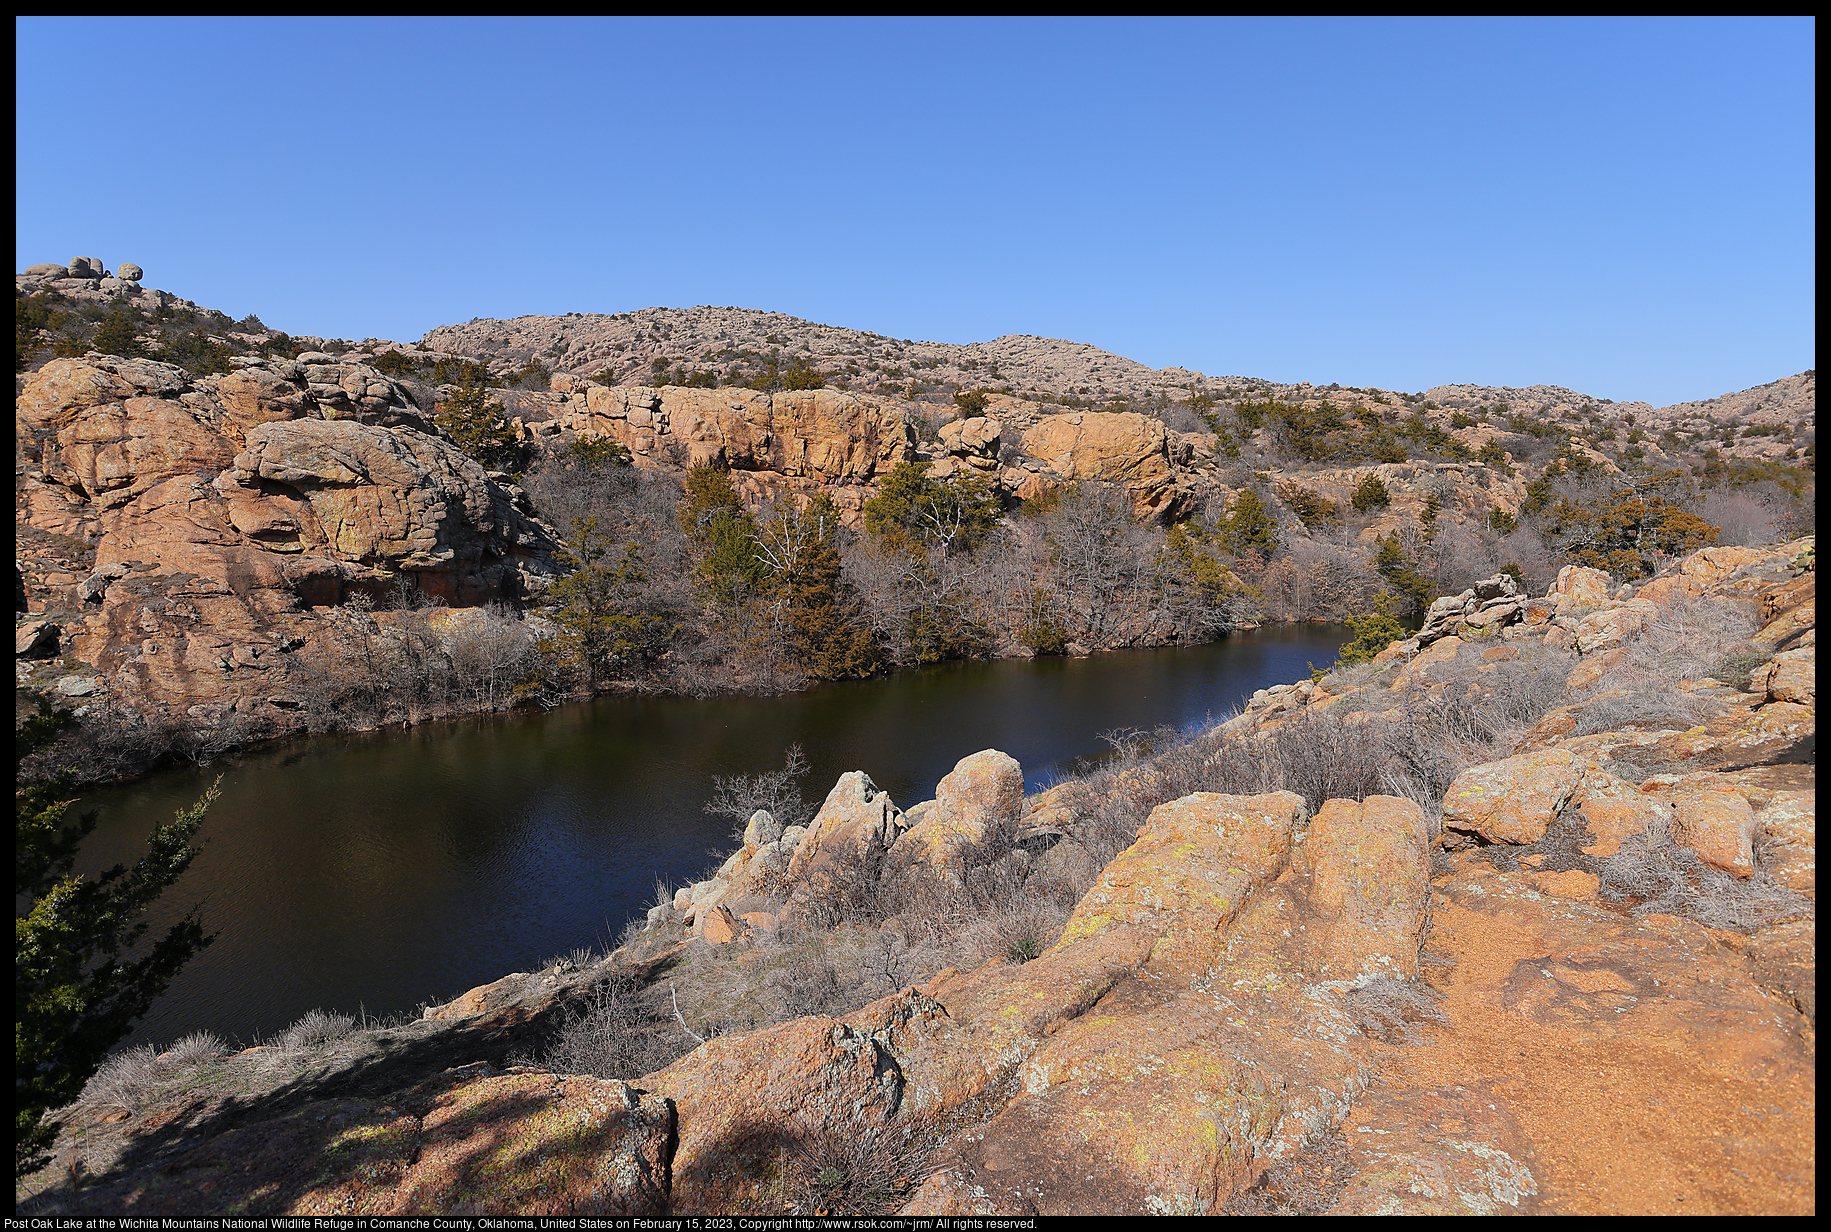 Post Oak Lake at the Wichita Mountains National Wildlife Refuge in Comanche County, Oklahoma, United States on February 15, 2023